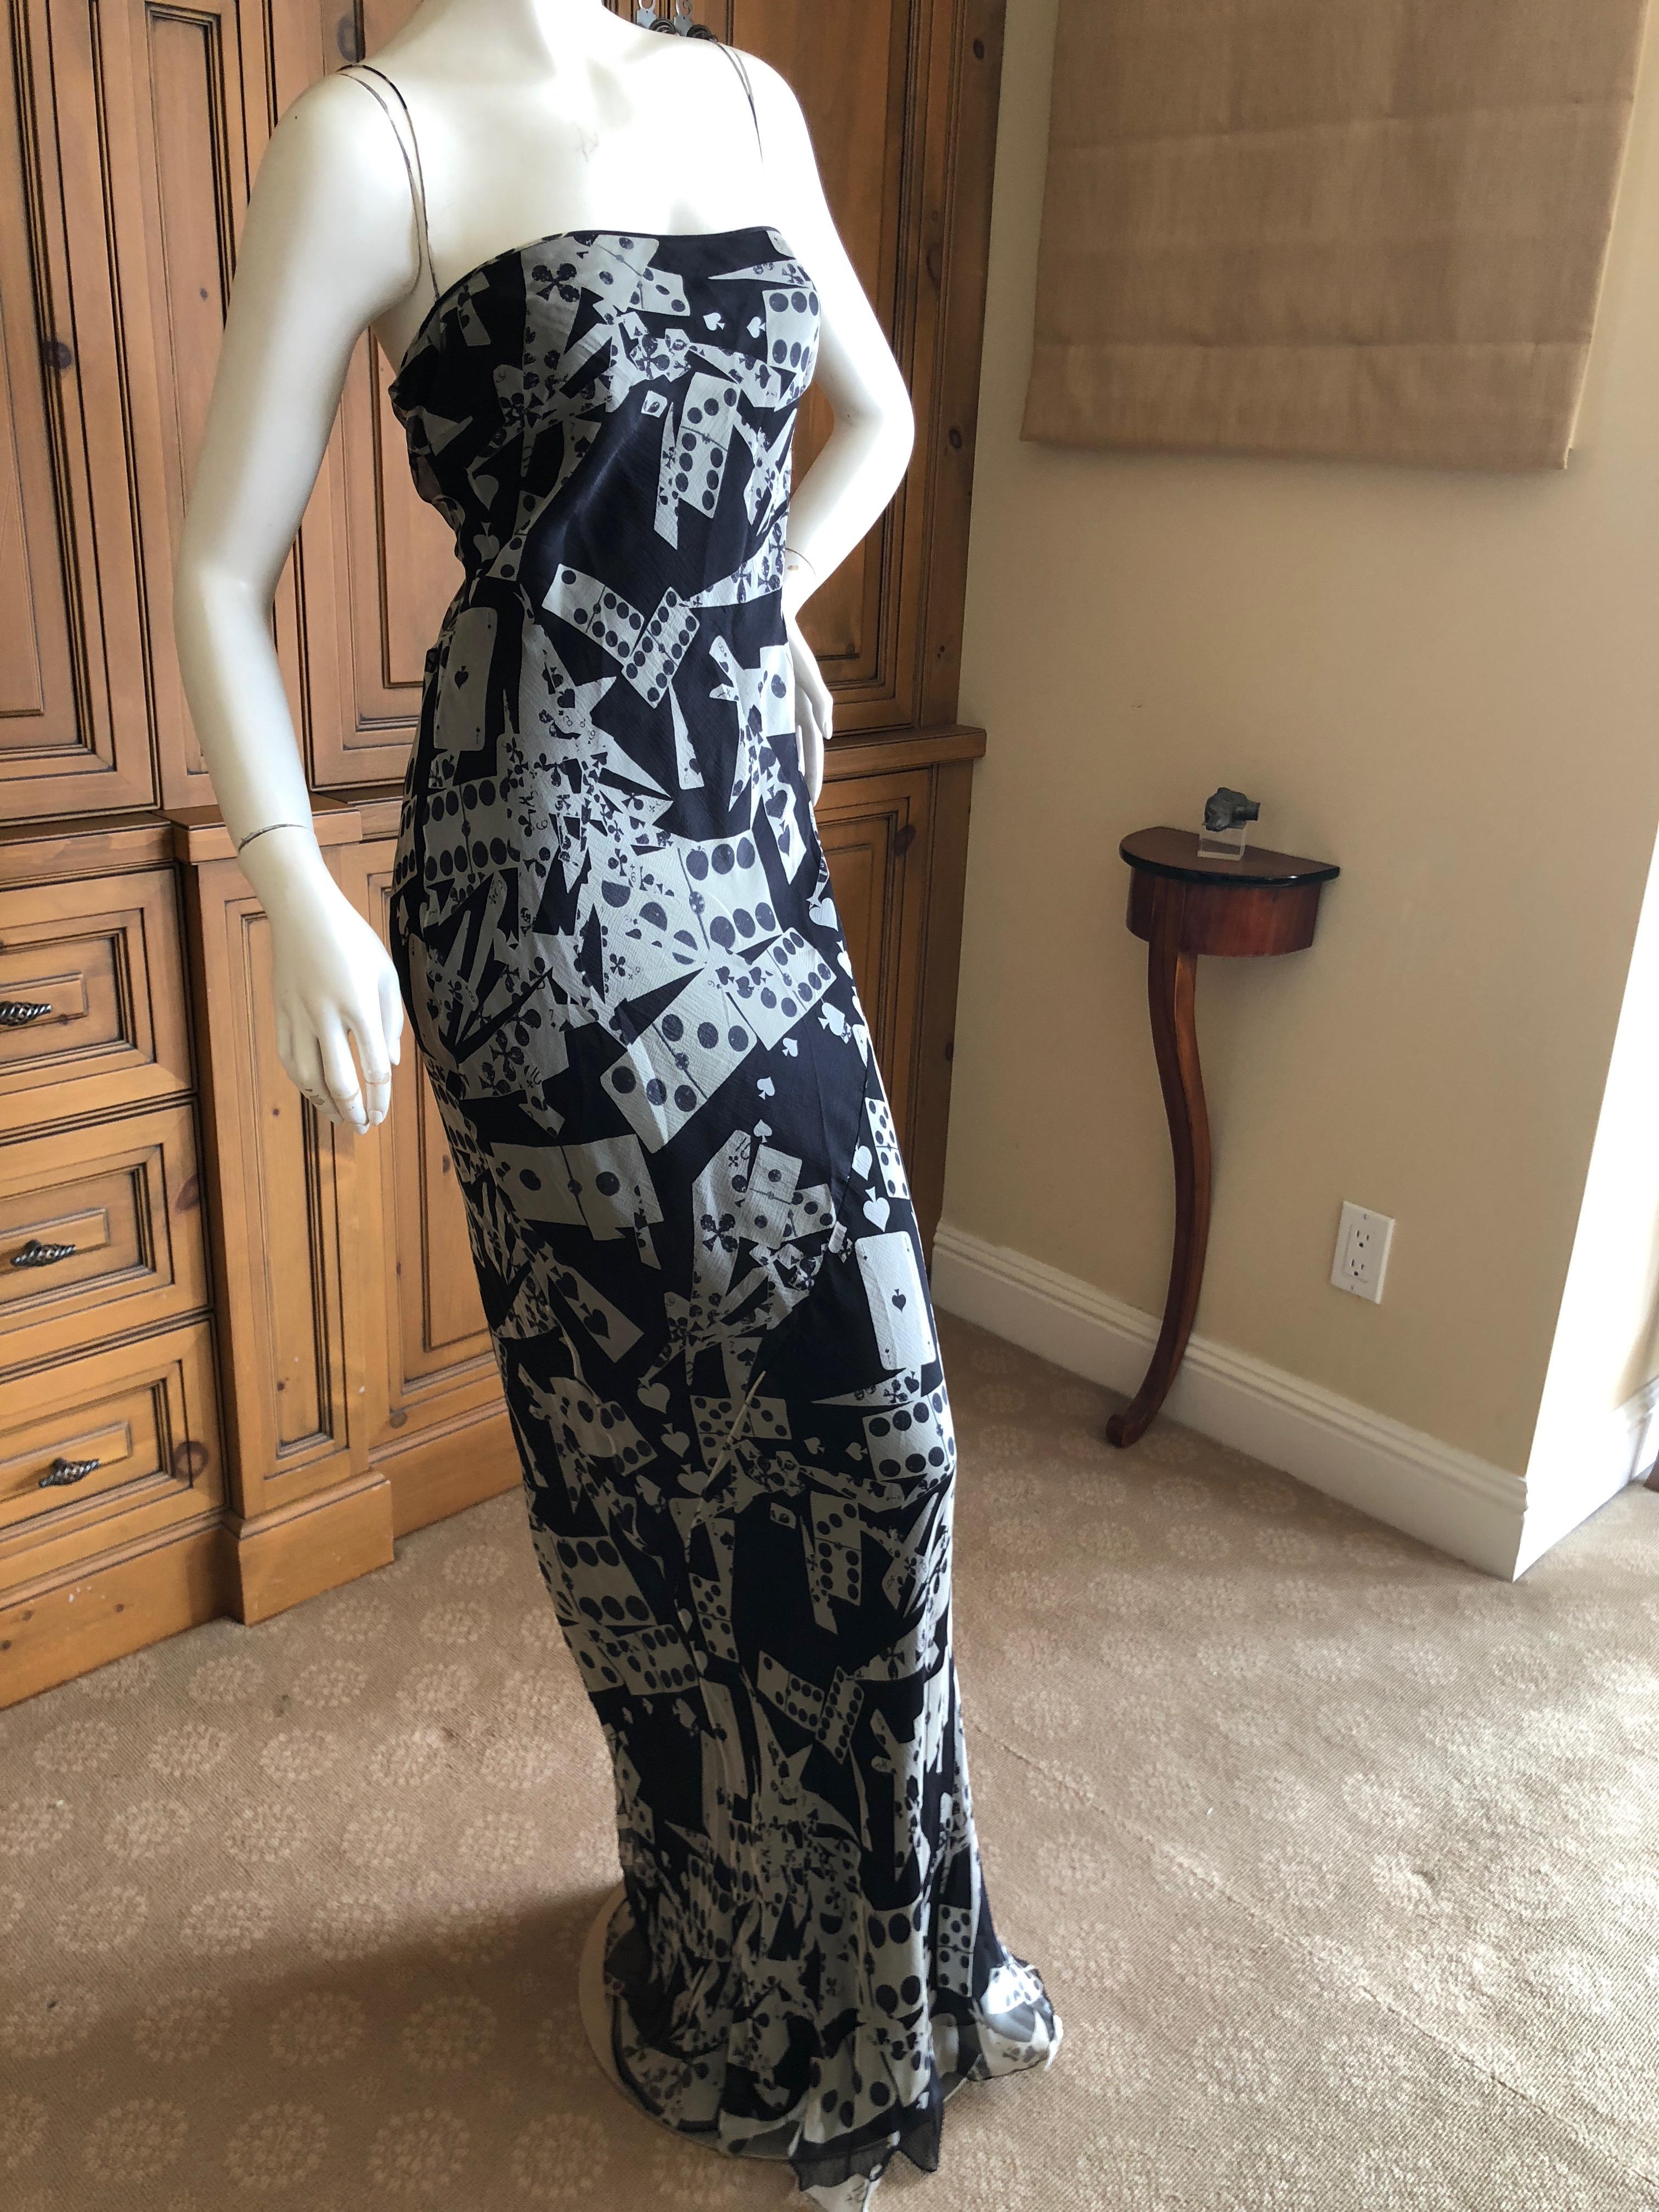 Christian Dior by John Galliano Playing Card Domino Print Silk Evening Dress

Please llook at all the details with the zoom feature, this is really special.

Size 44 but seems to run small

Bust 36